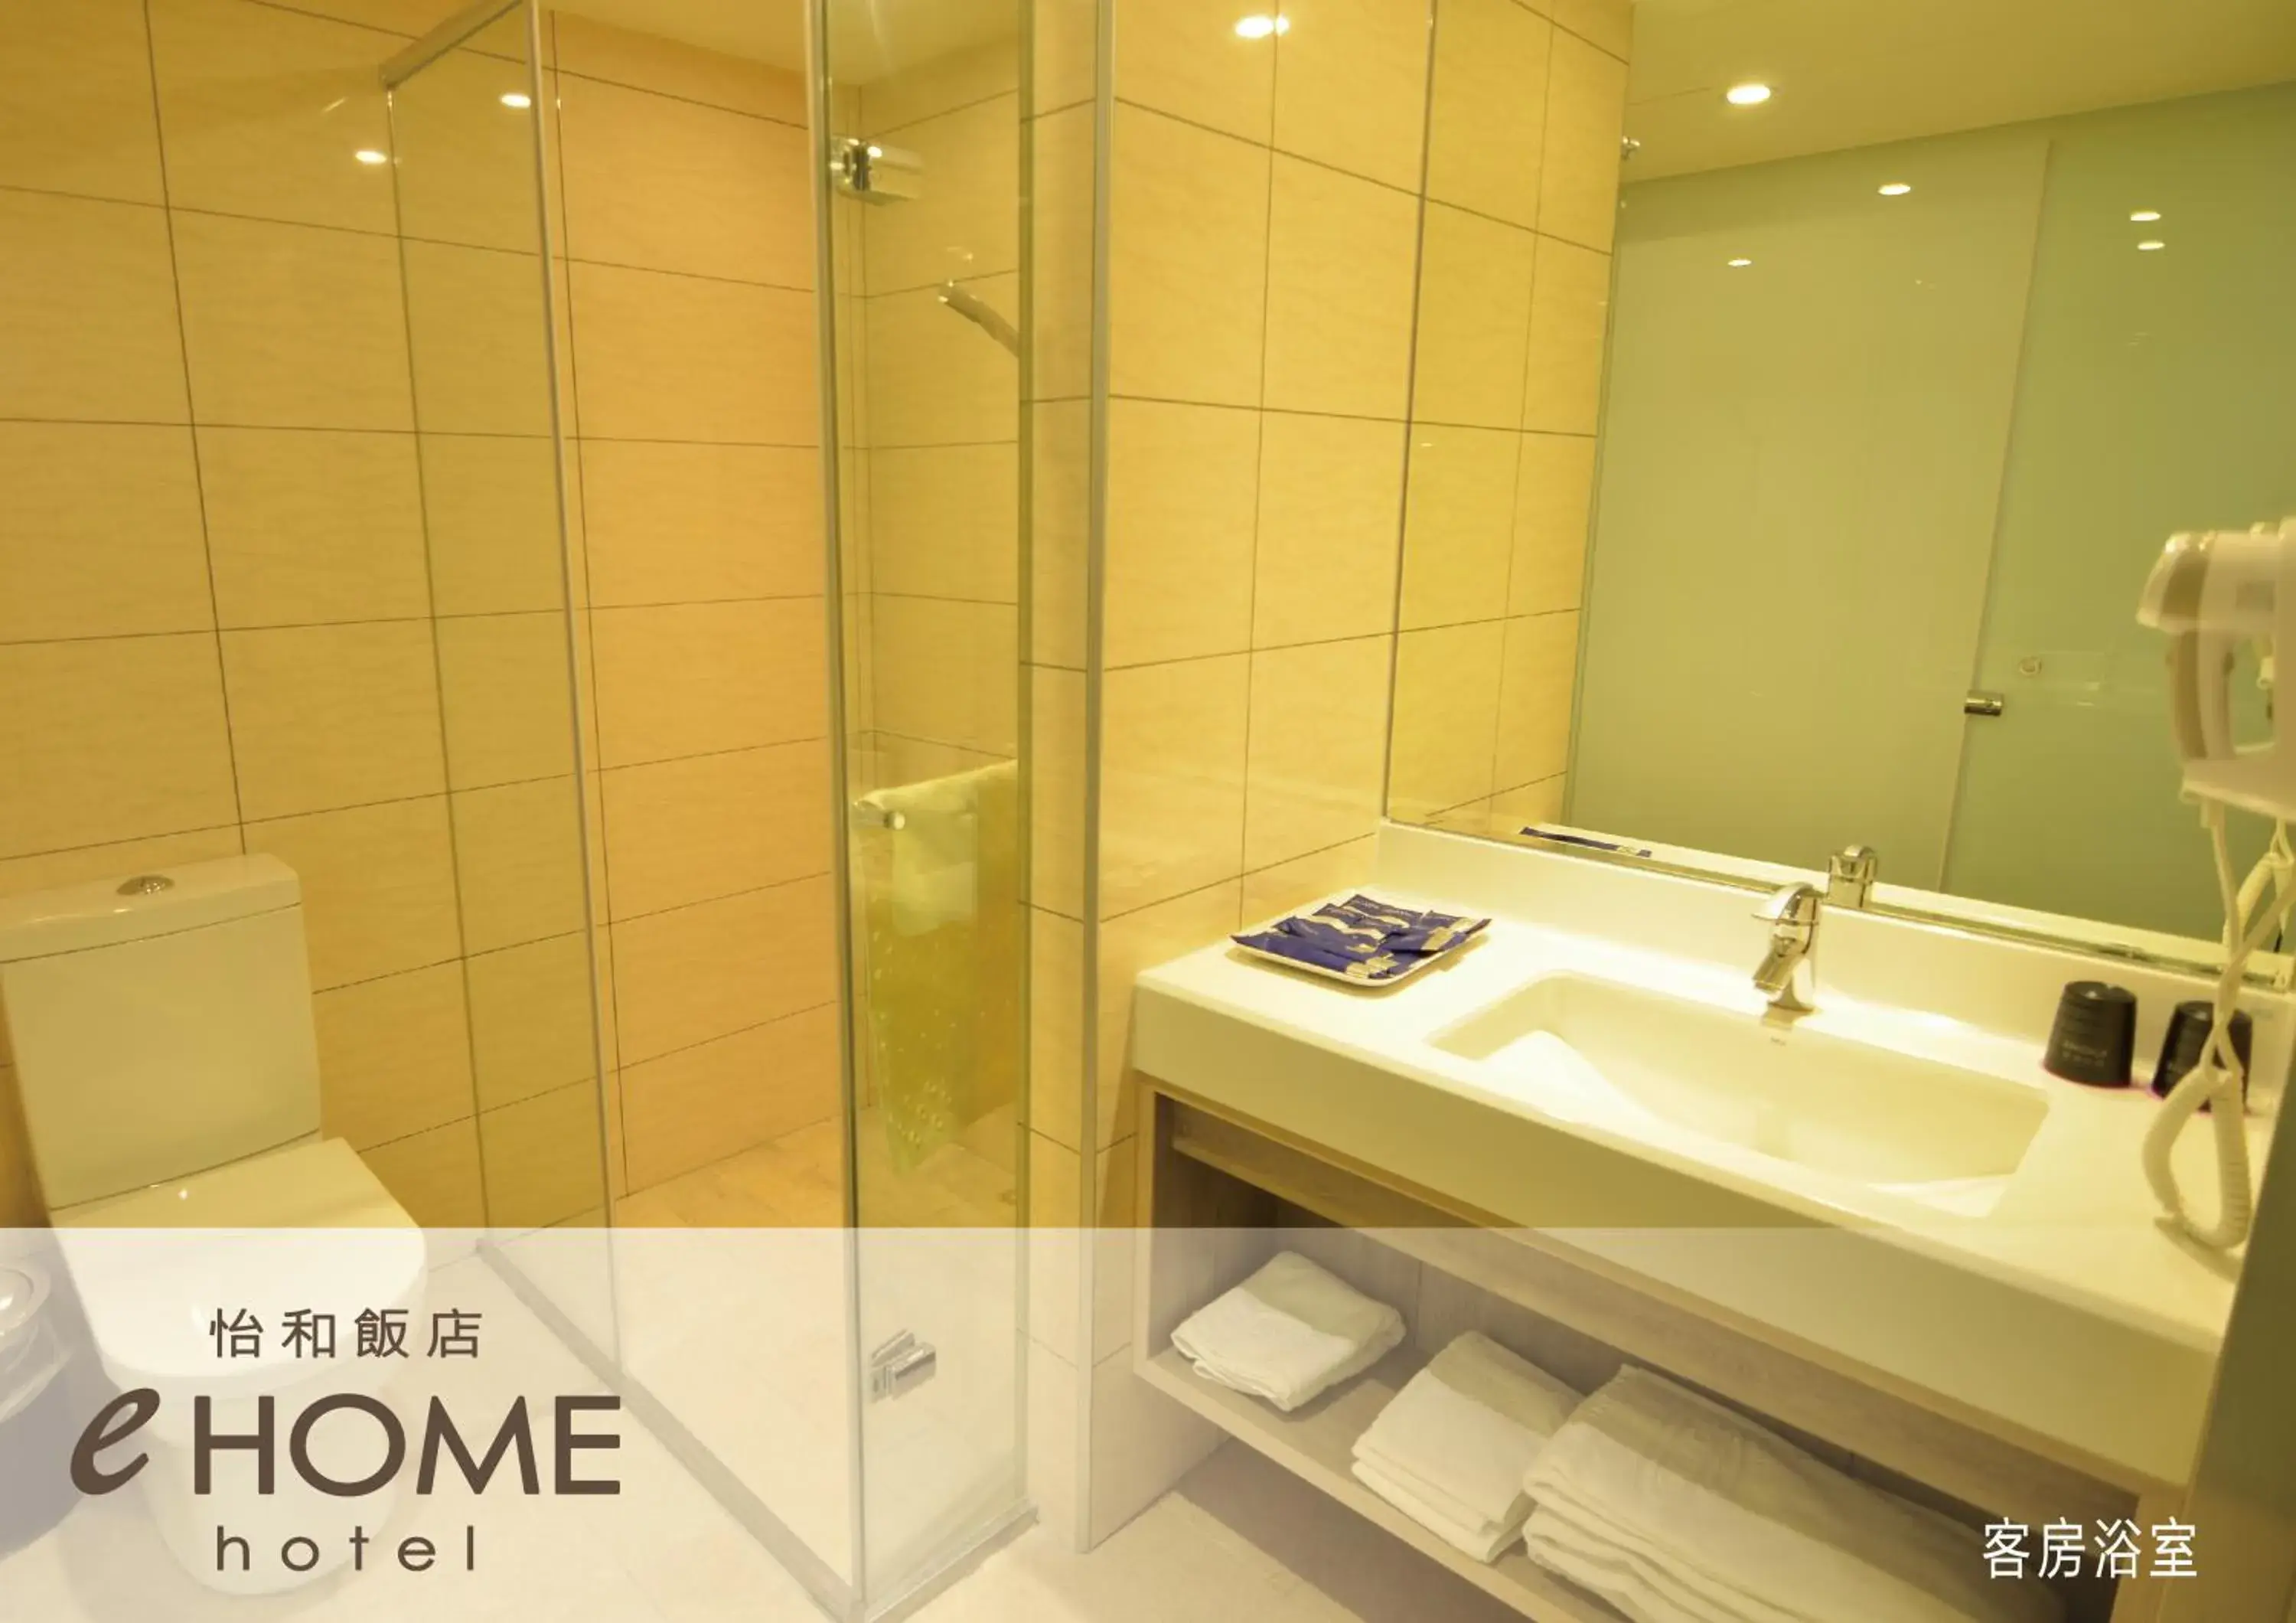 Bathroom in Ehome Hotel